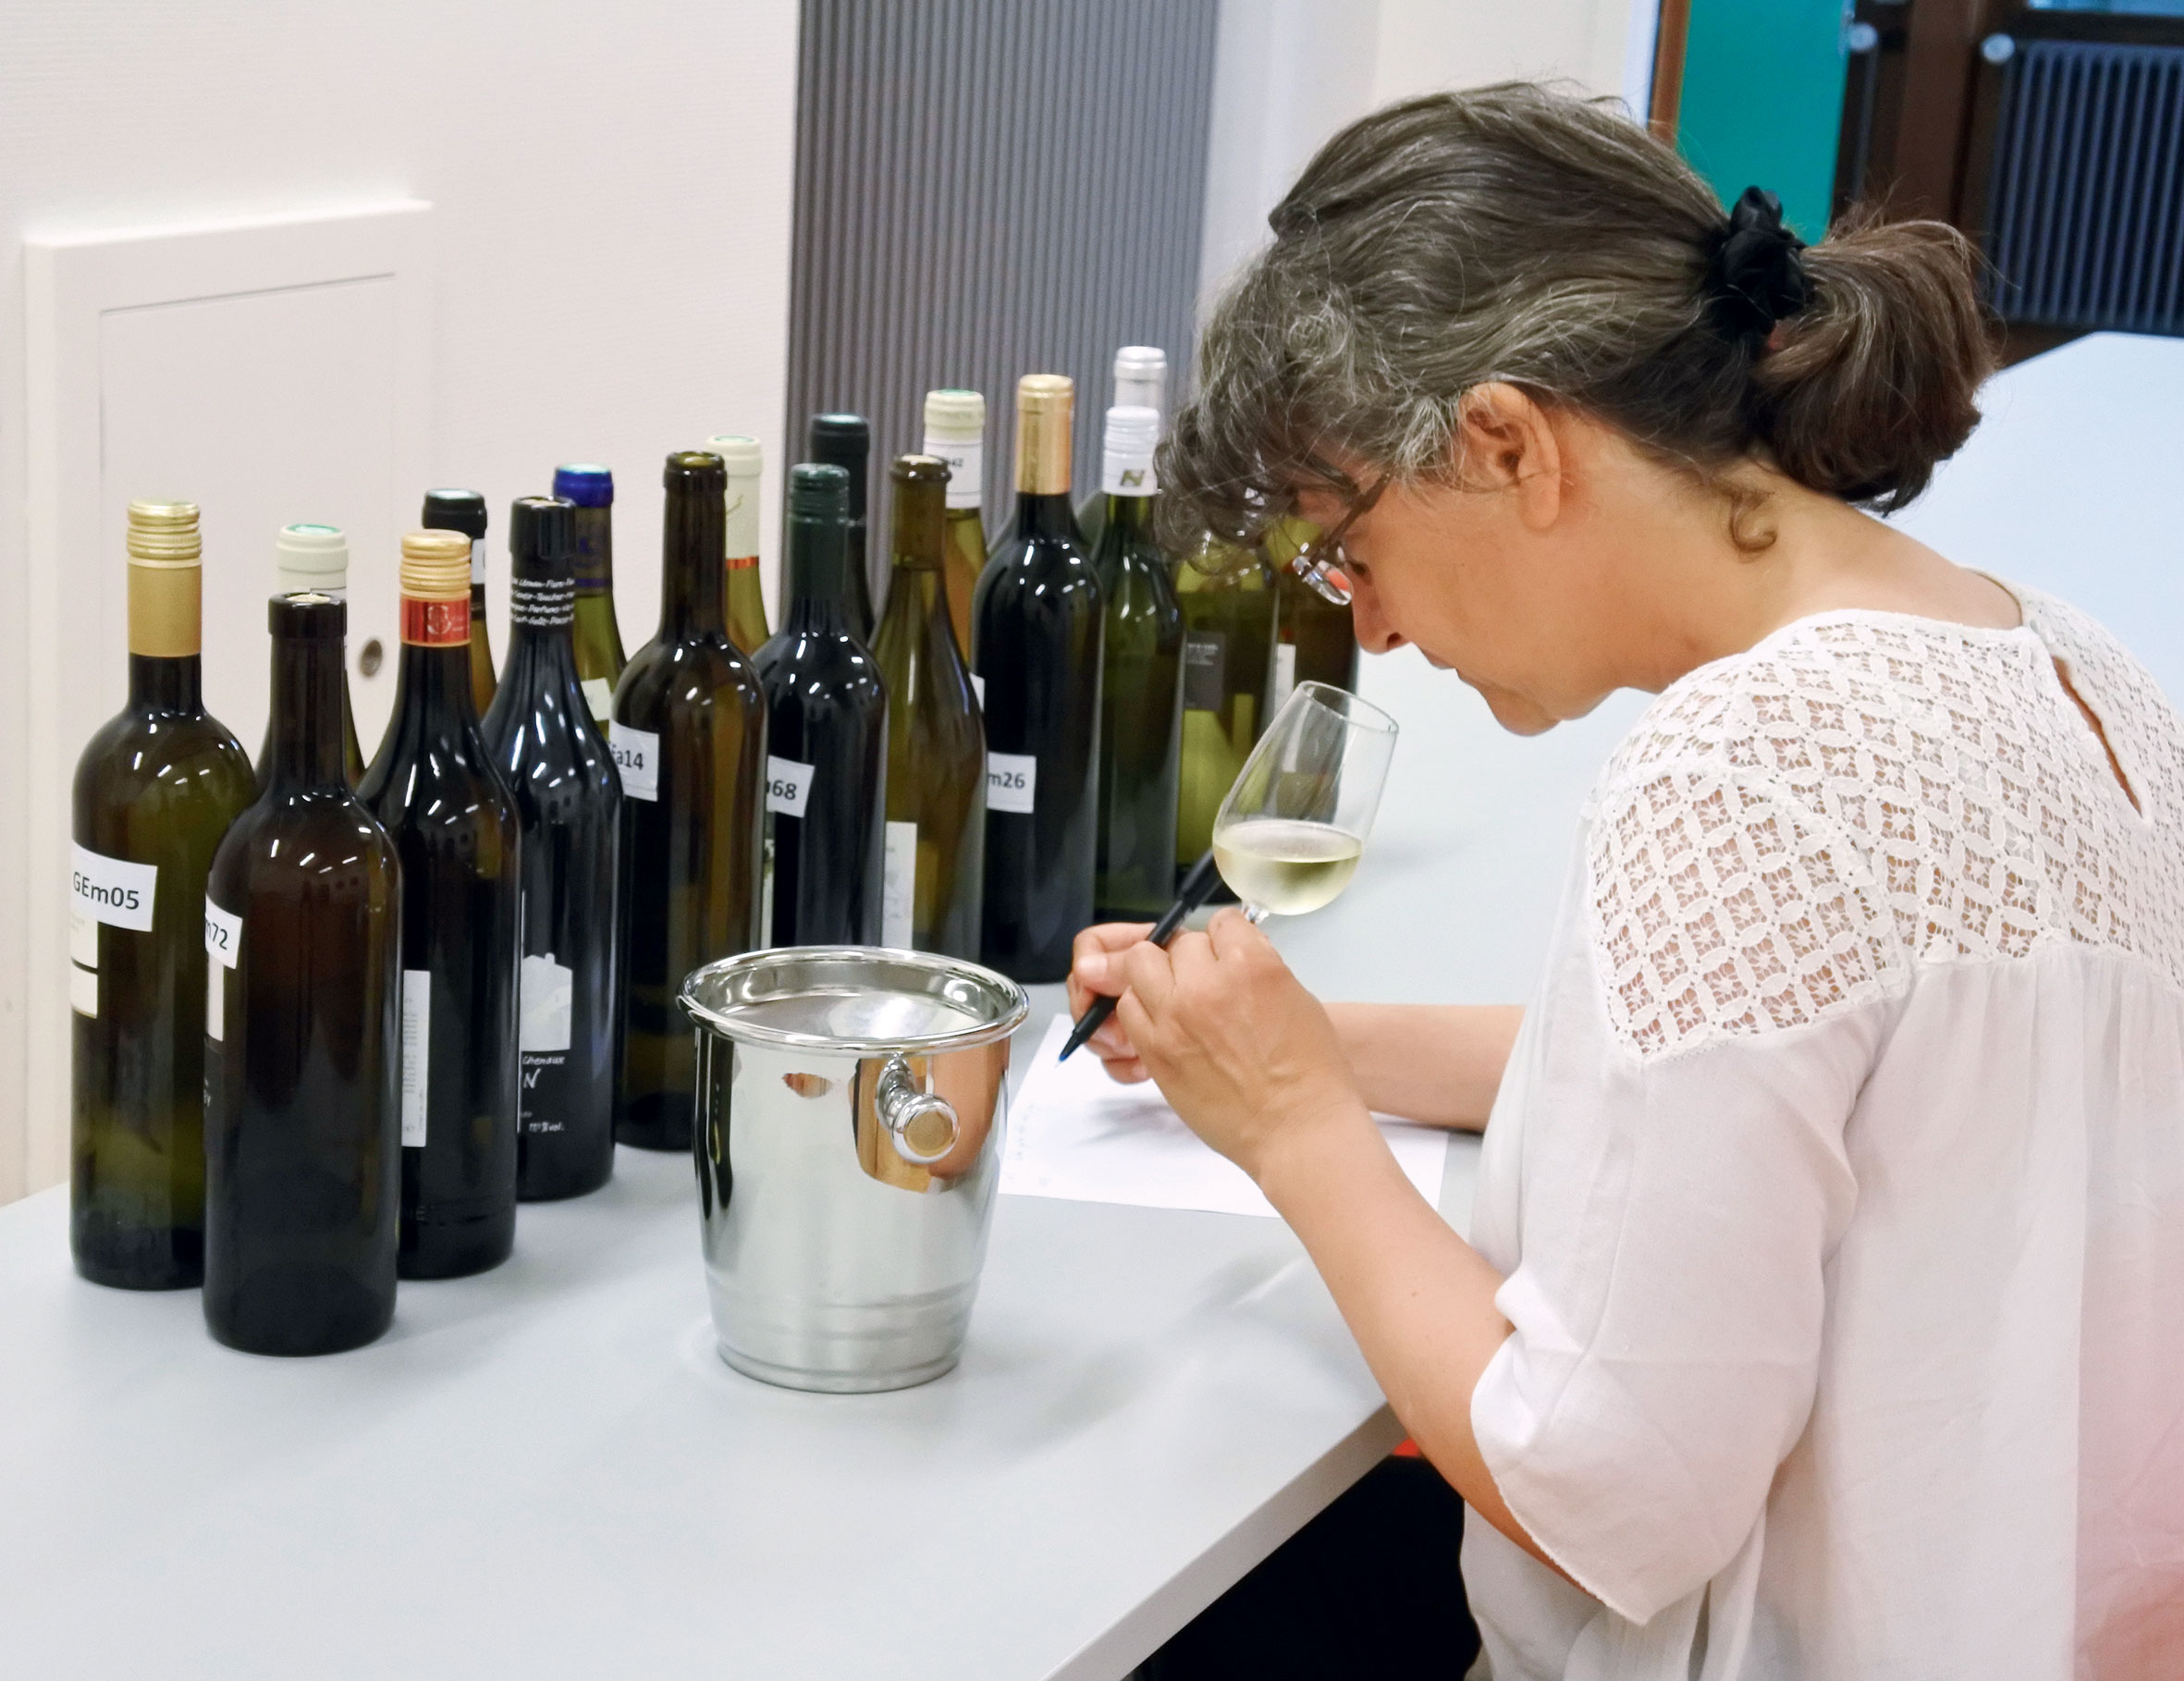 Minerality in Chasselas: a sensory notion shared by wine professionals?